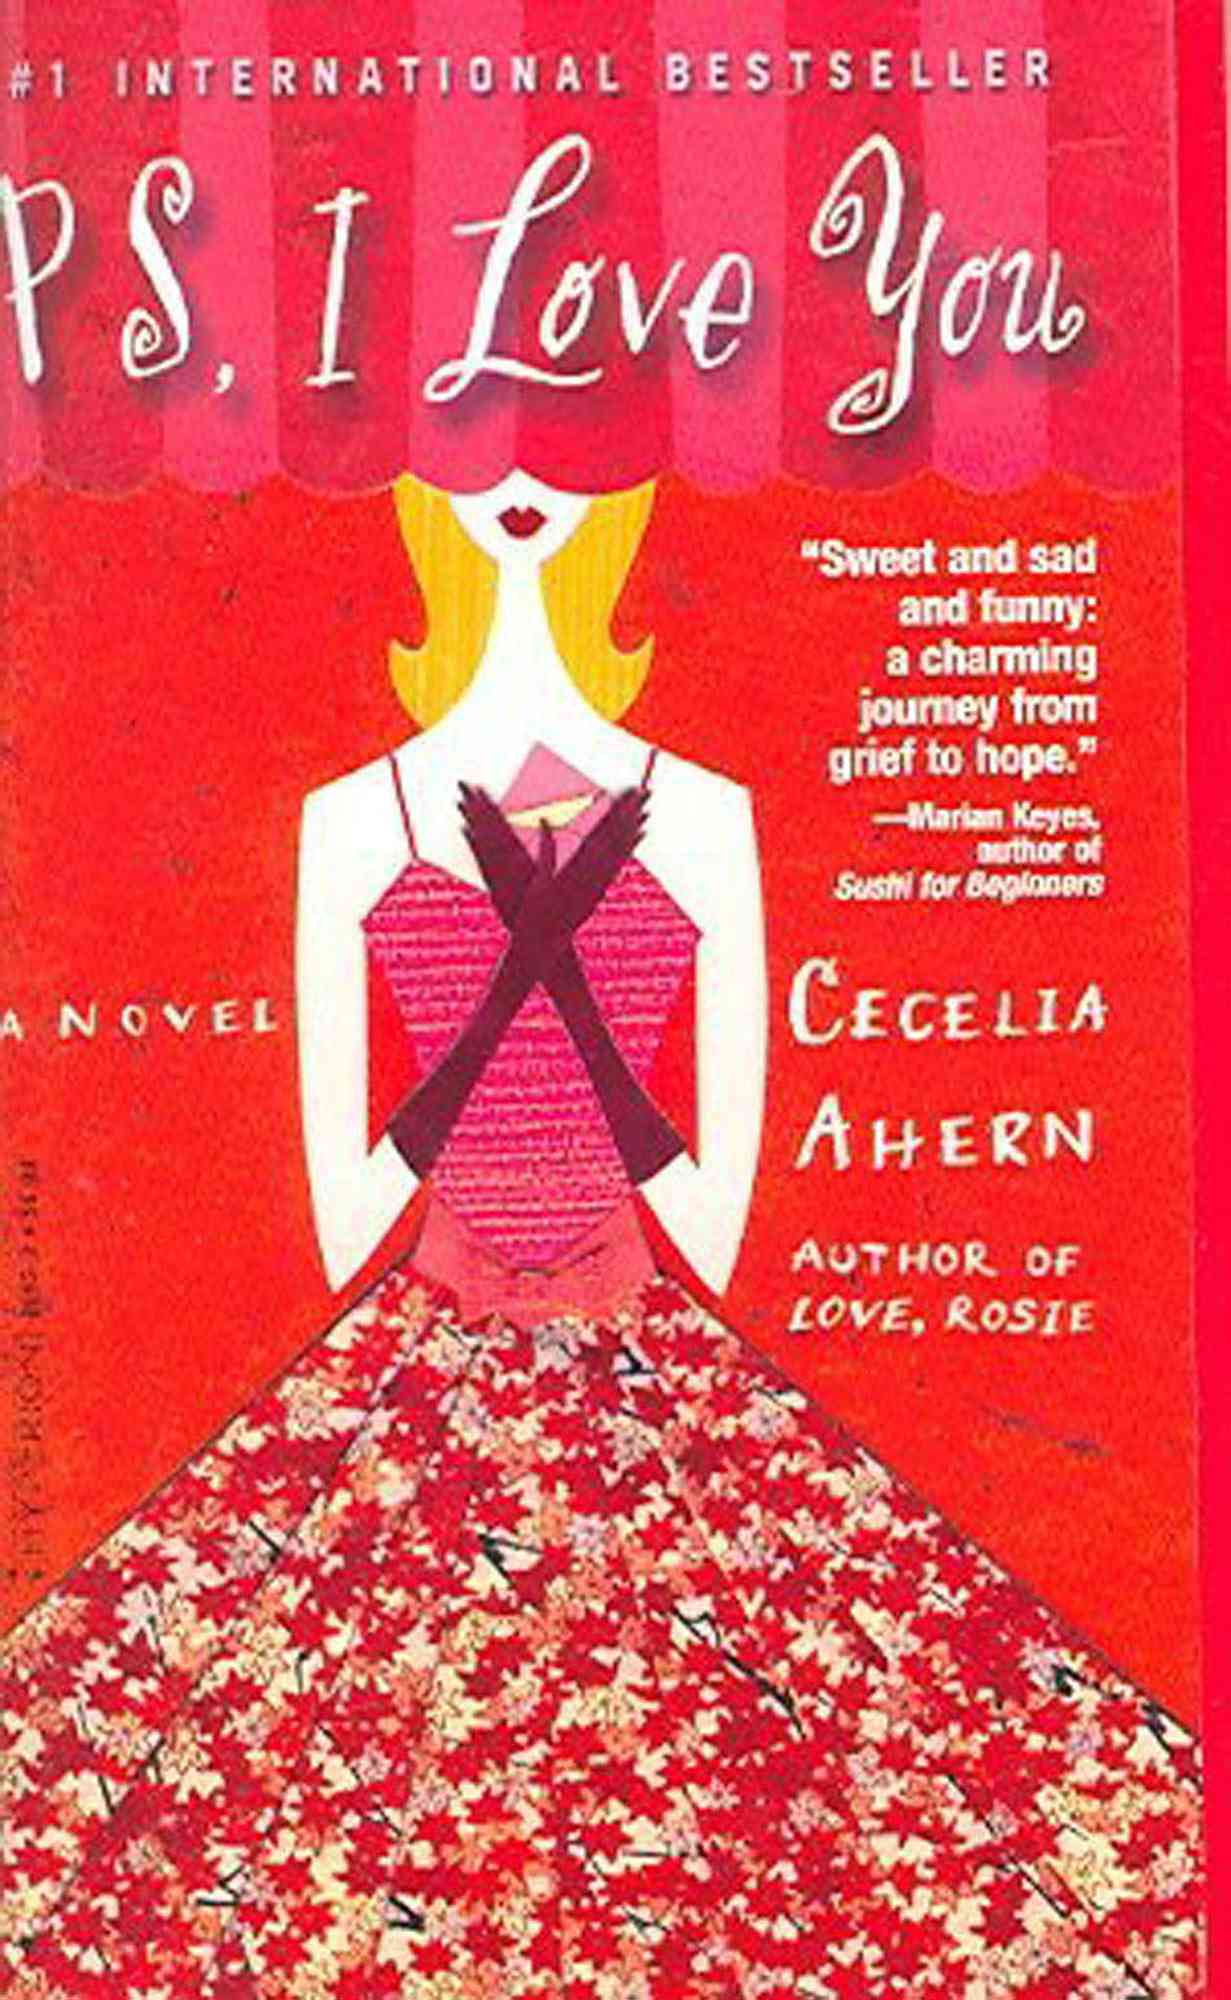 P.S. I Love You&nbsp;by Cecelia Ahern